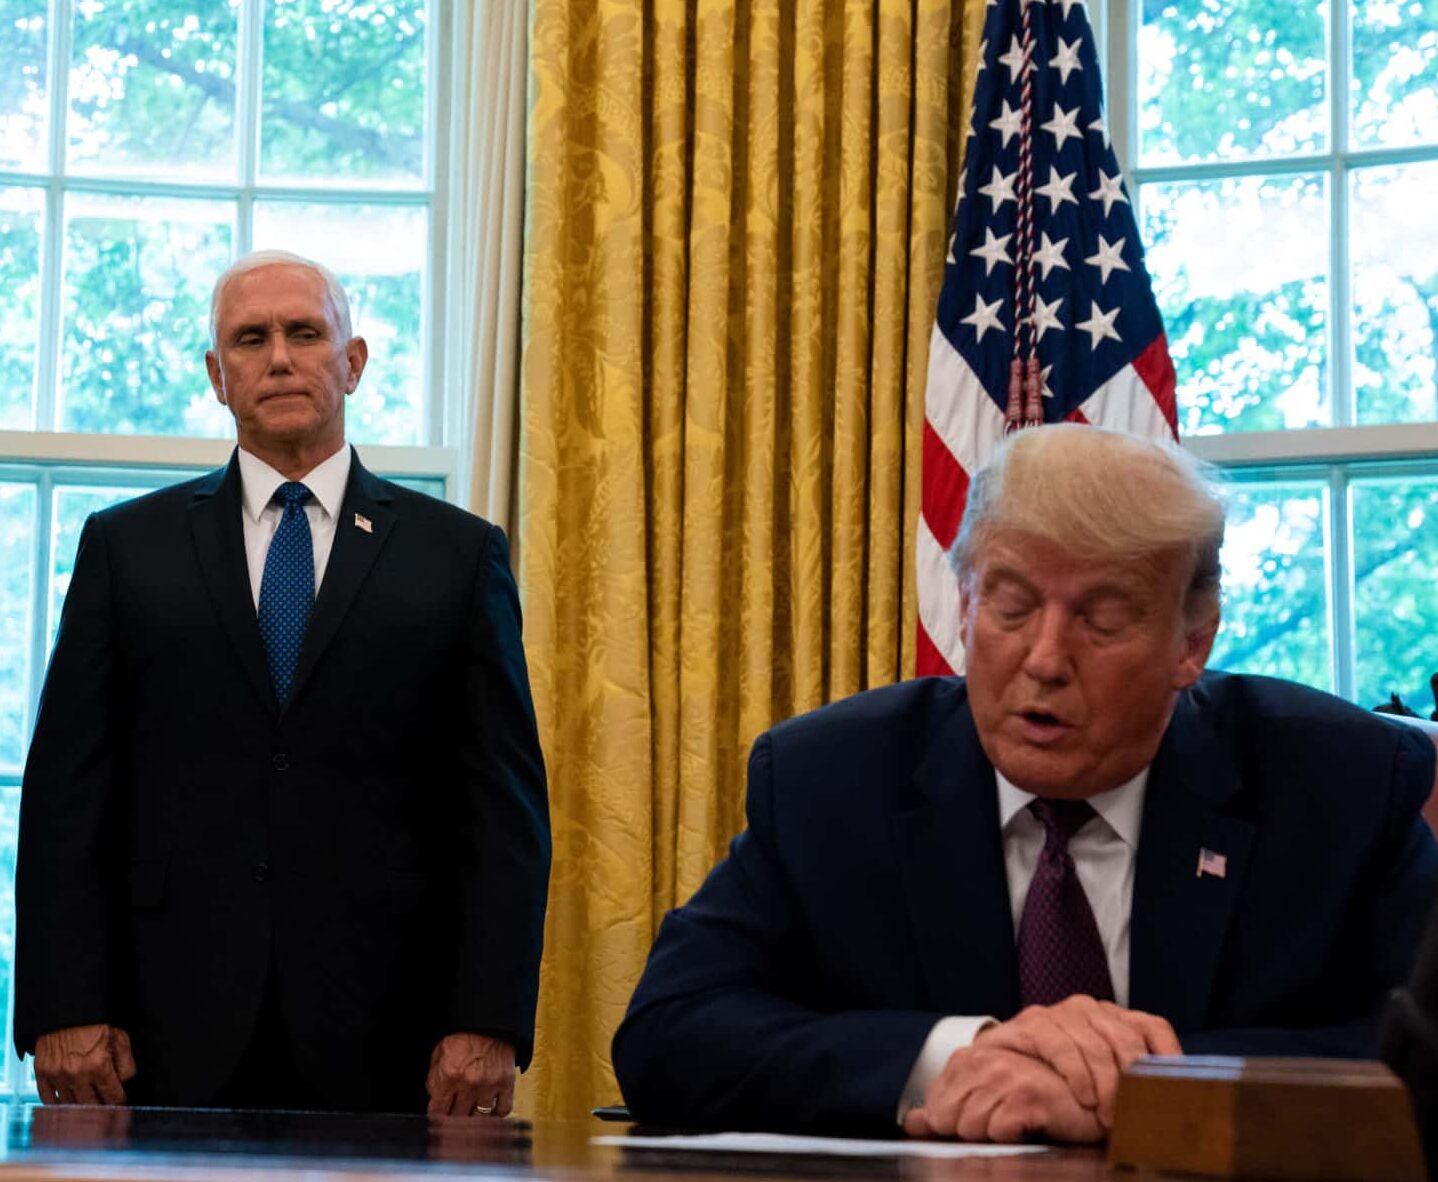 WASHINGTON, DC - SEPTEMBER 11: U.S. President Donald Trump, flanked by U.S. Treasury Secretary Steven Mnuchin (L) and U.S. Vice President Mike Pence (C), speaks in the Oval Office to announce that Bahrain will establish diplomatic relations with Israel, at the White House in Washington, DC on September 11, 2020. The announcement follows one last month by Israel and the United Arab Emirates that they would seek to normalize relations with each other. (Photo by Anna Moneymaker-Pool/Getty Images)